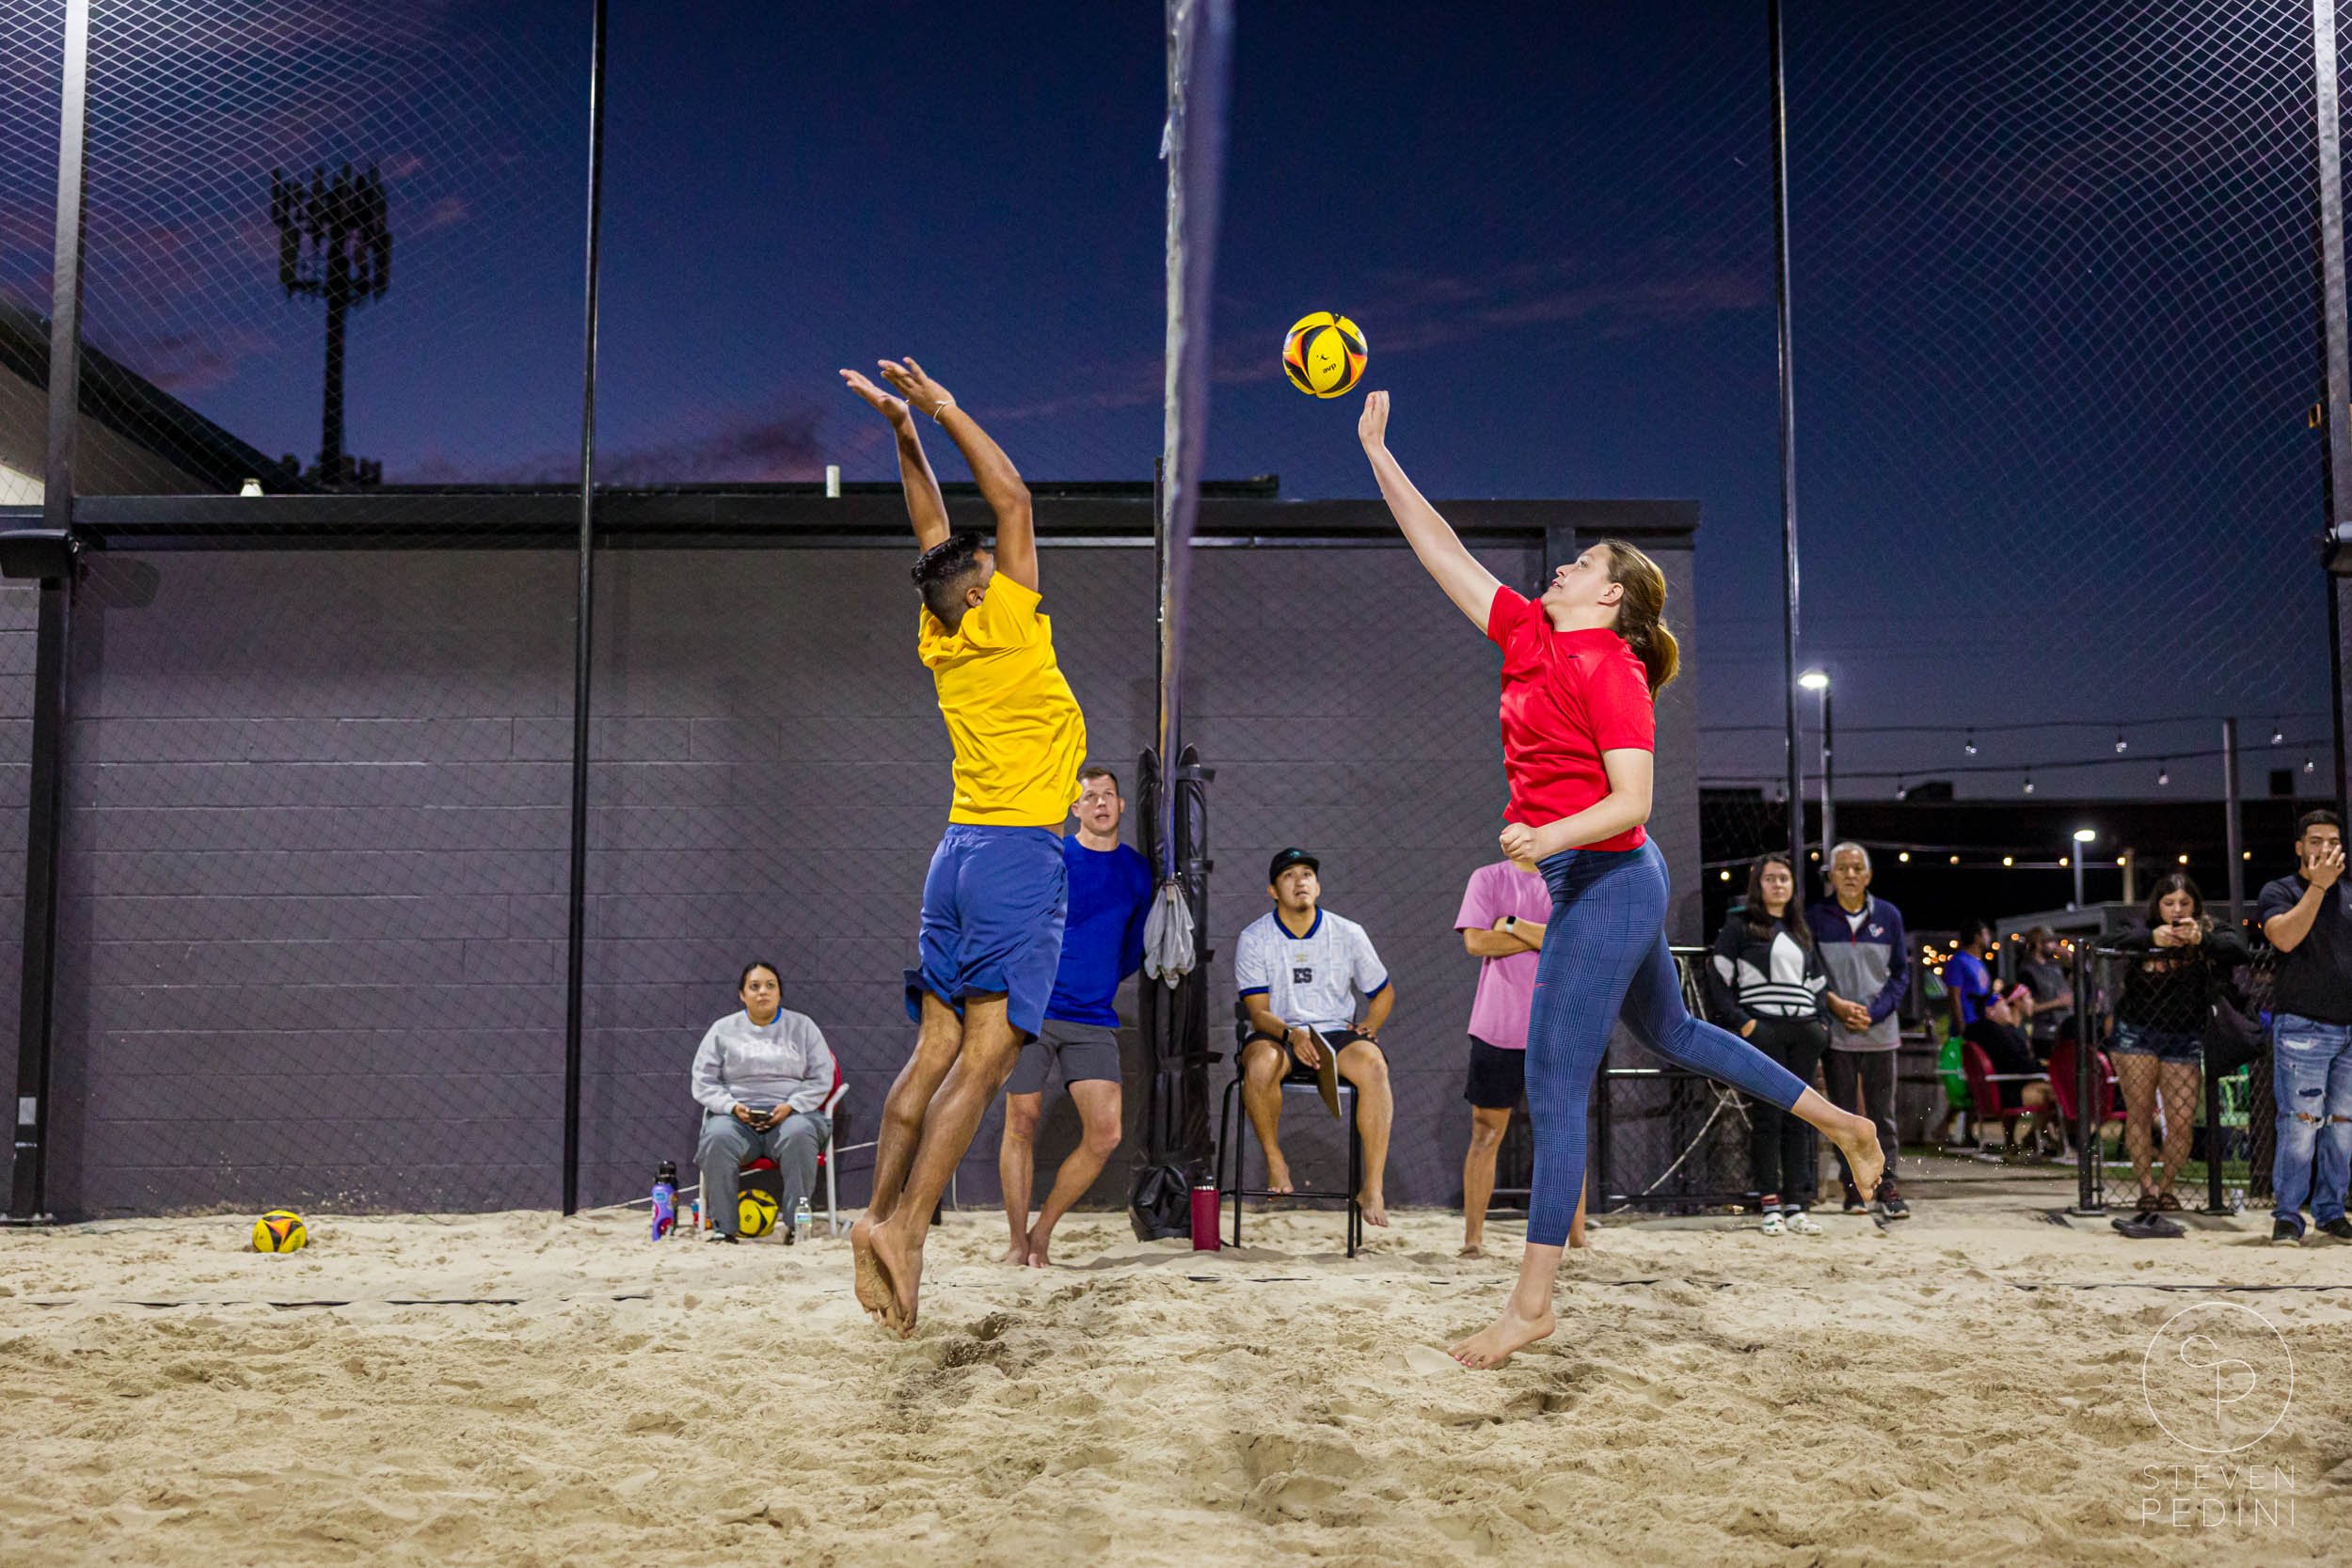 Steven Pedini Photography - Bumpy Pickle - Sand Volleyball - Houston TX - World Cup of Volleyball - 00355.jpg